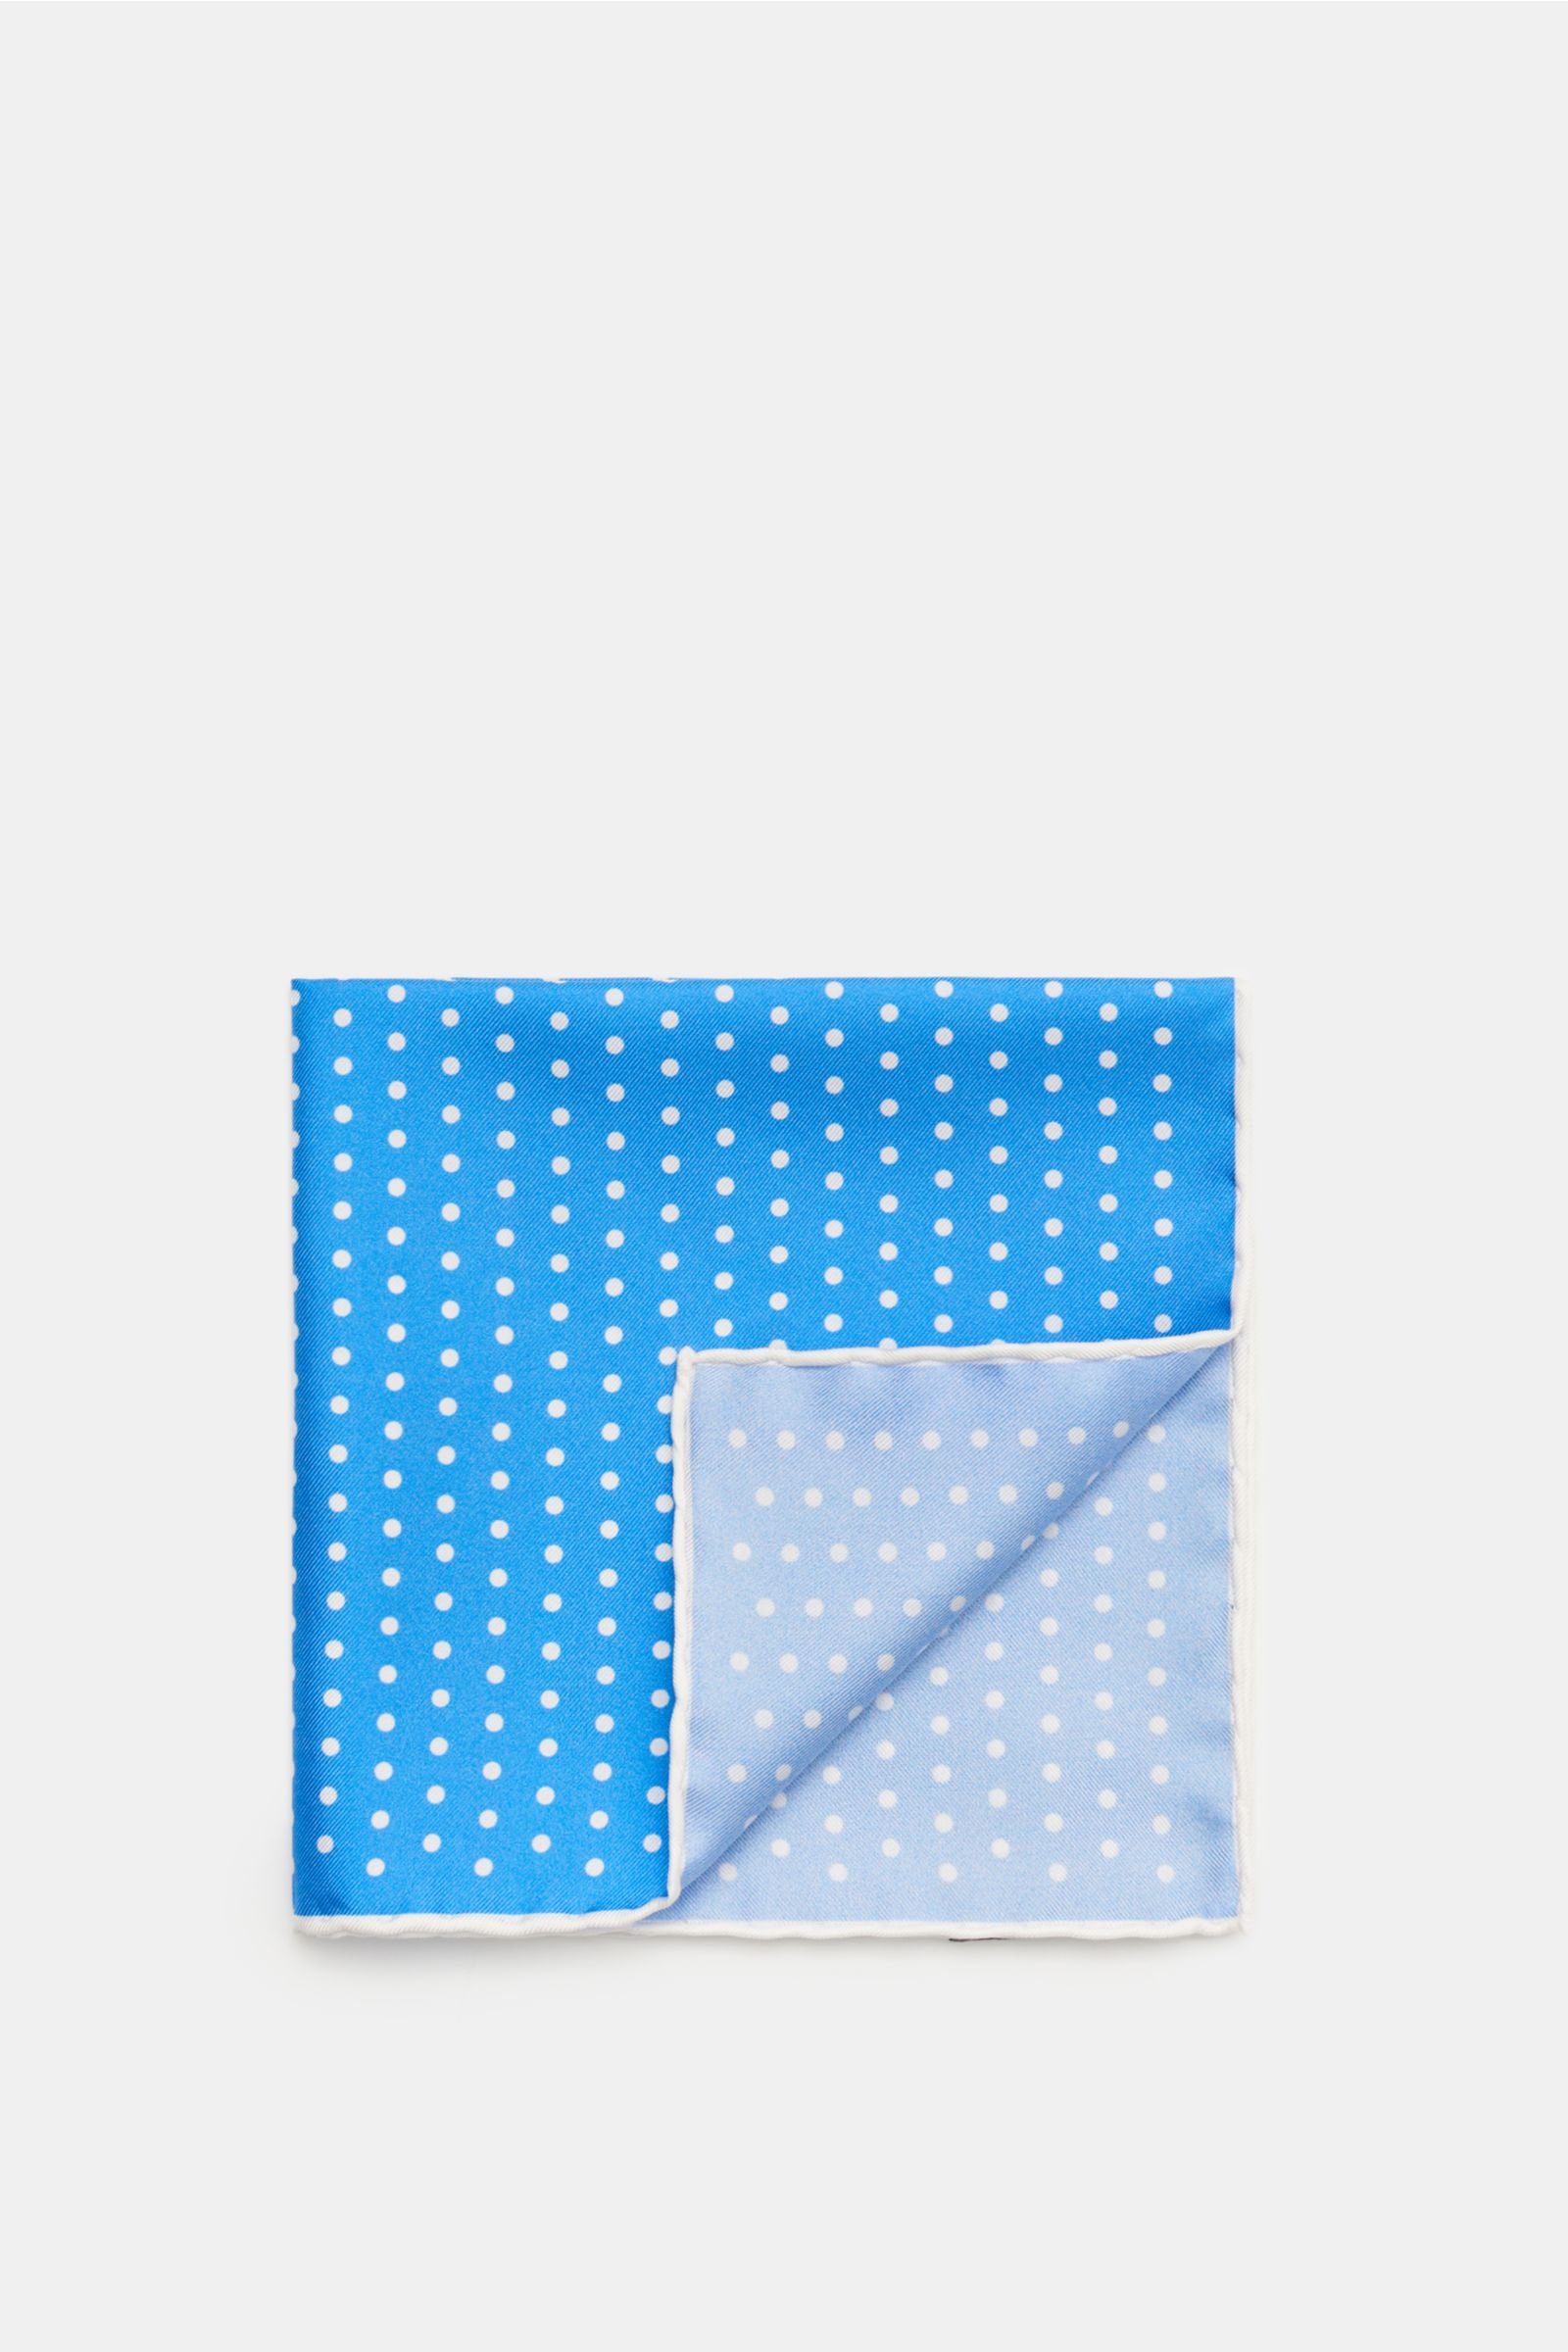 Pocket square blue/white with polka dots